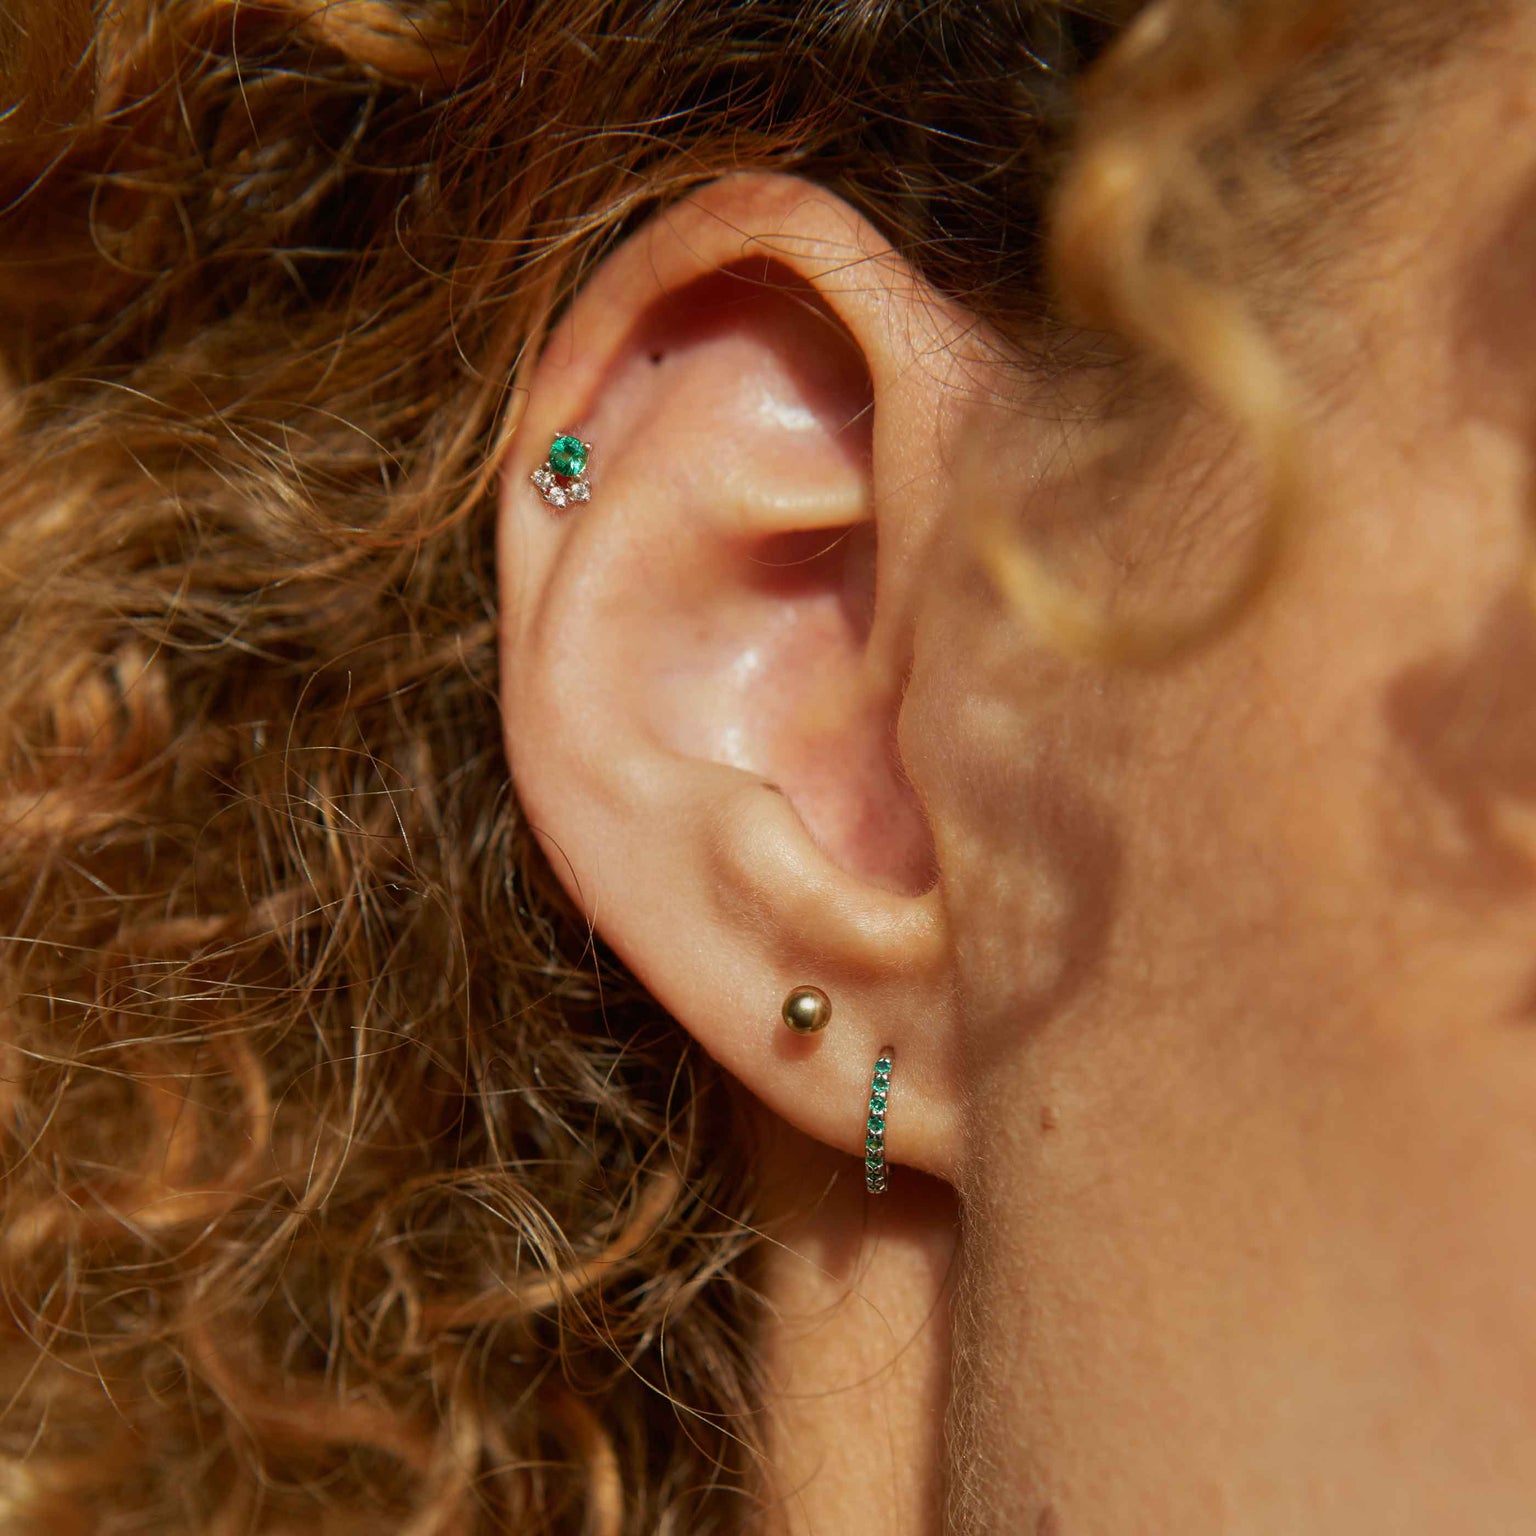 Emerald & Crystal Barbell in Gold worn in helix